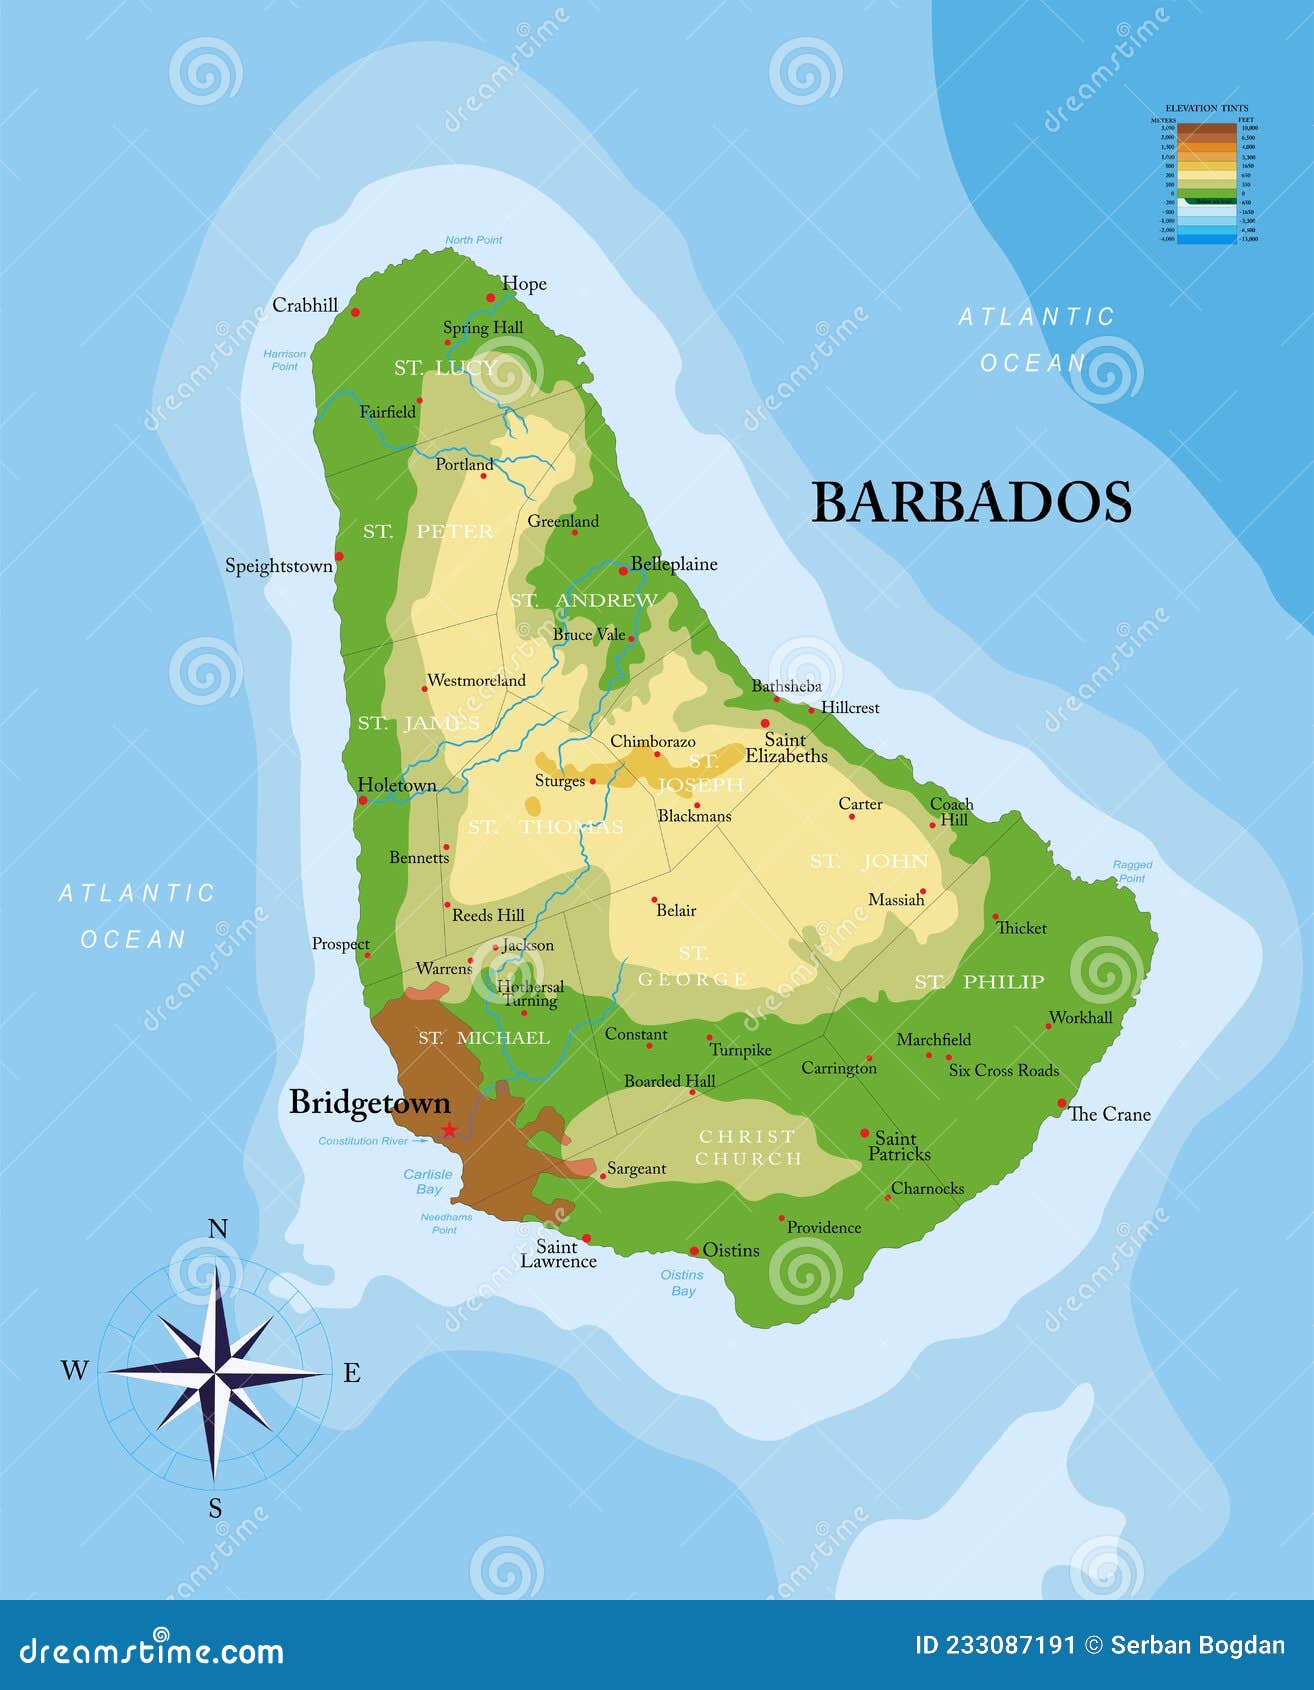 barbados island highly detailed physical map